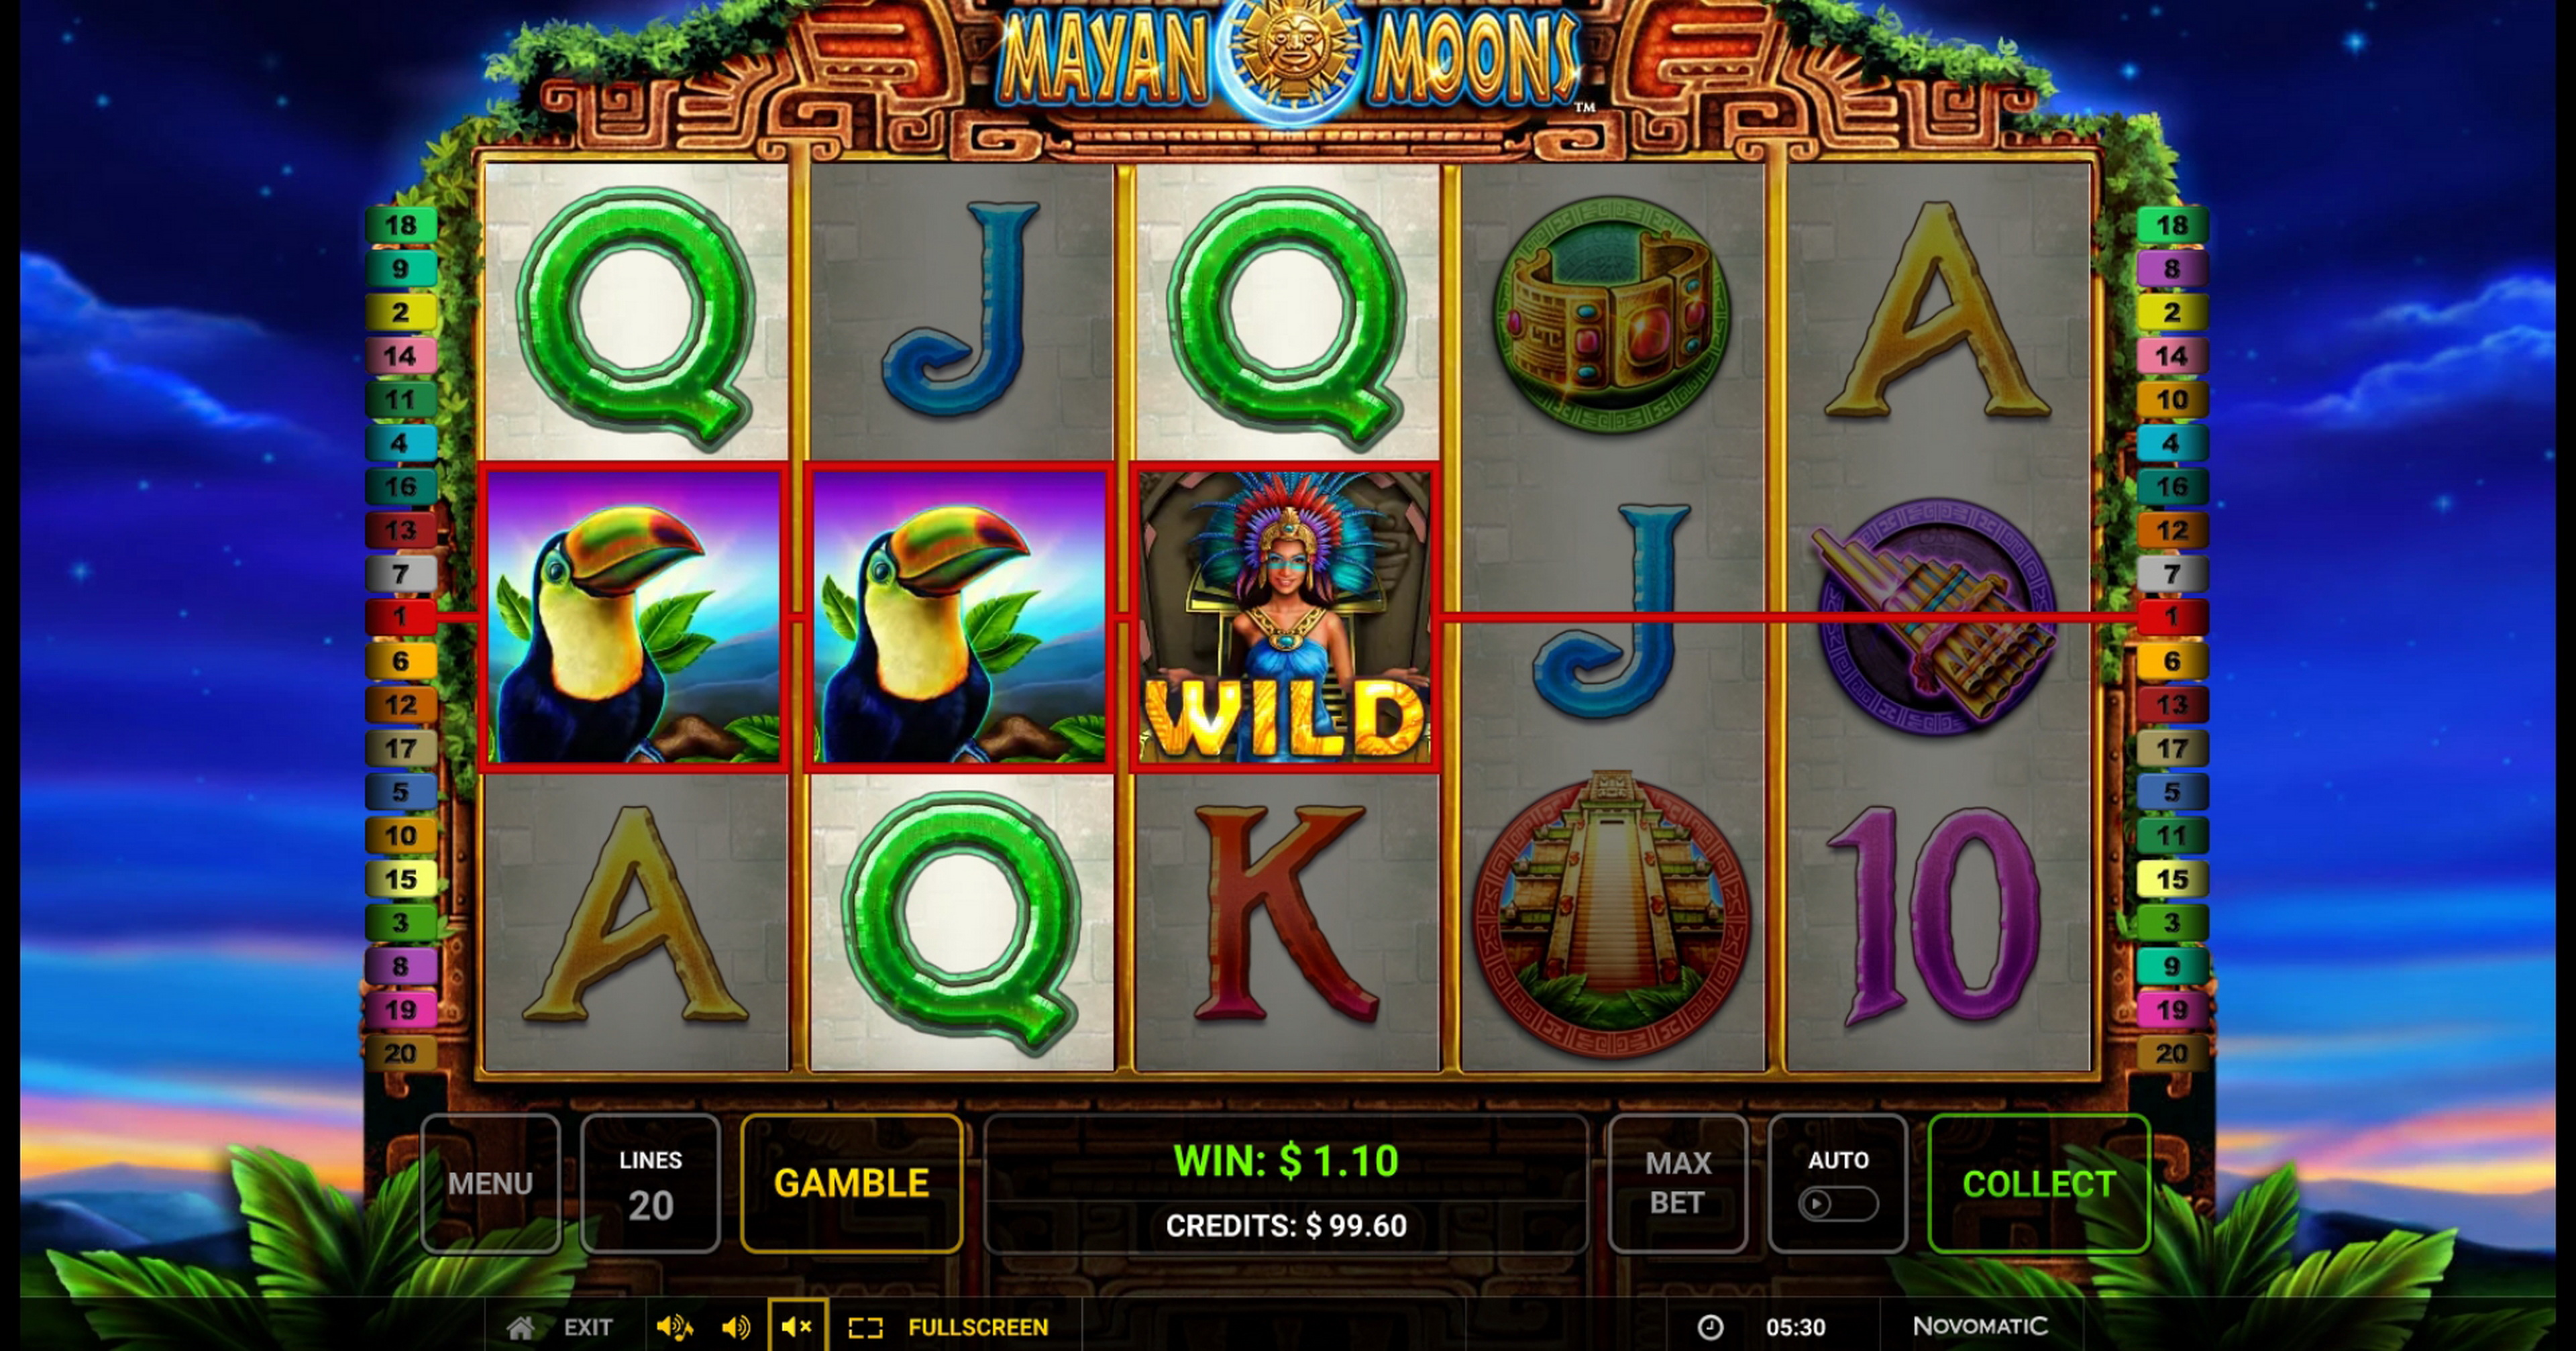 Win Money in Mayan Moons Free Slot Game by Greentube